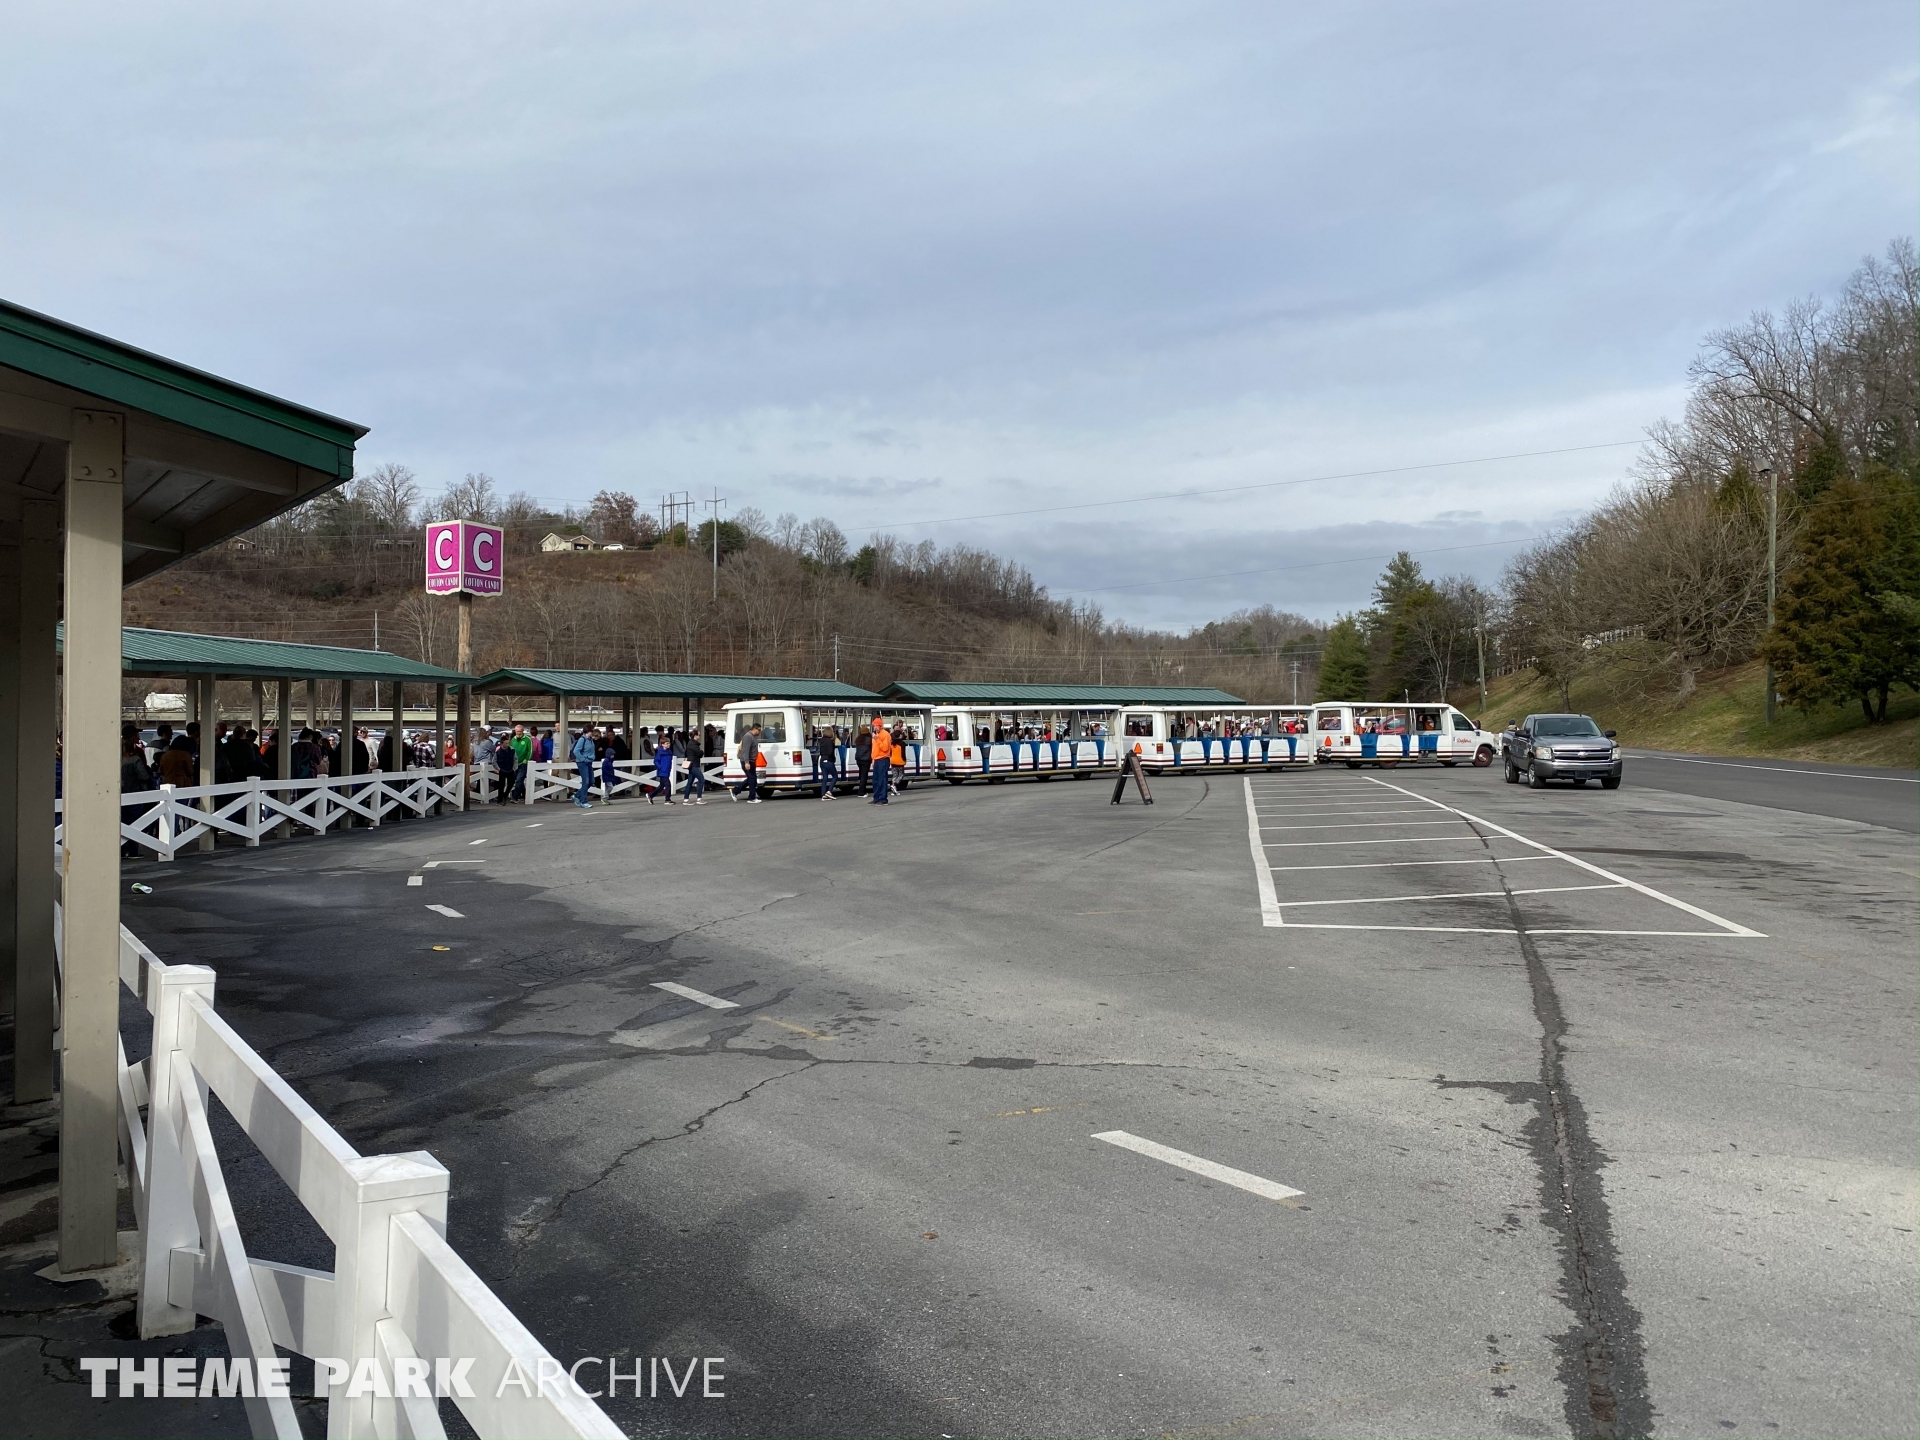 Parking at Dollywood Theme Park Archive